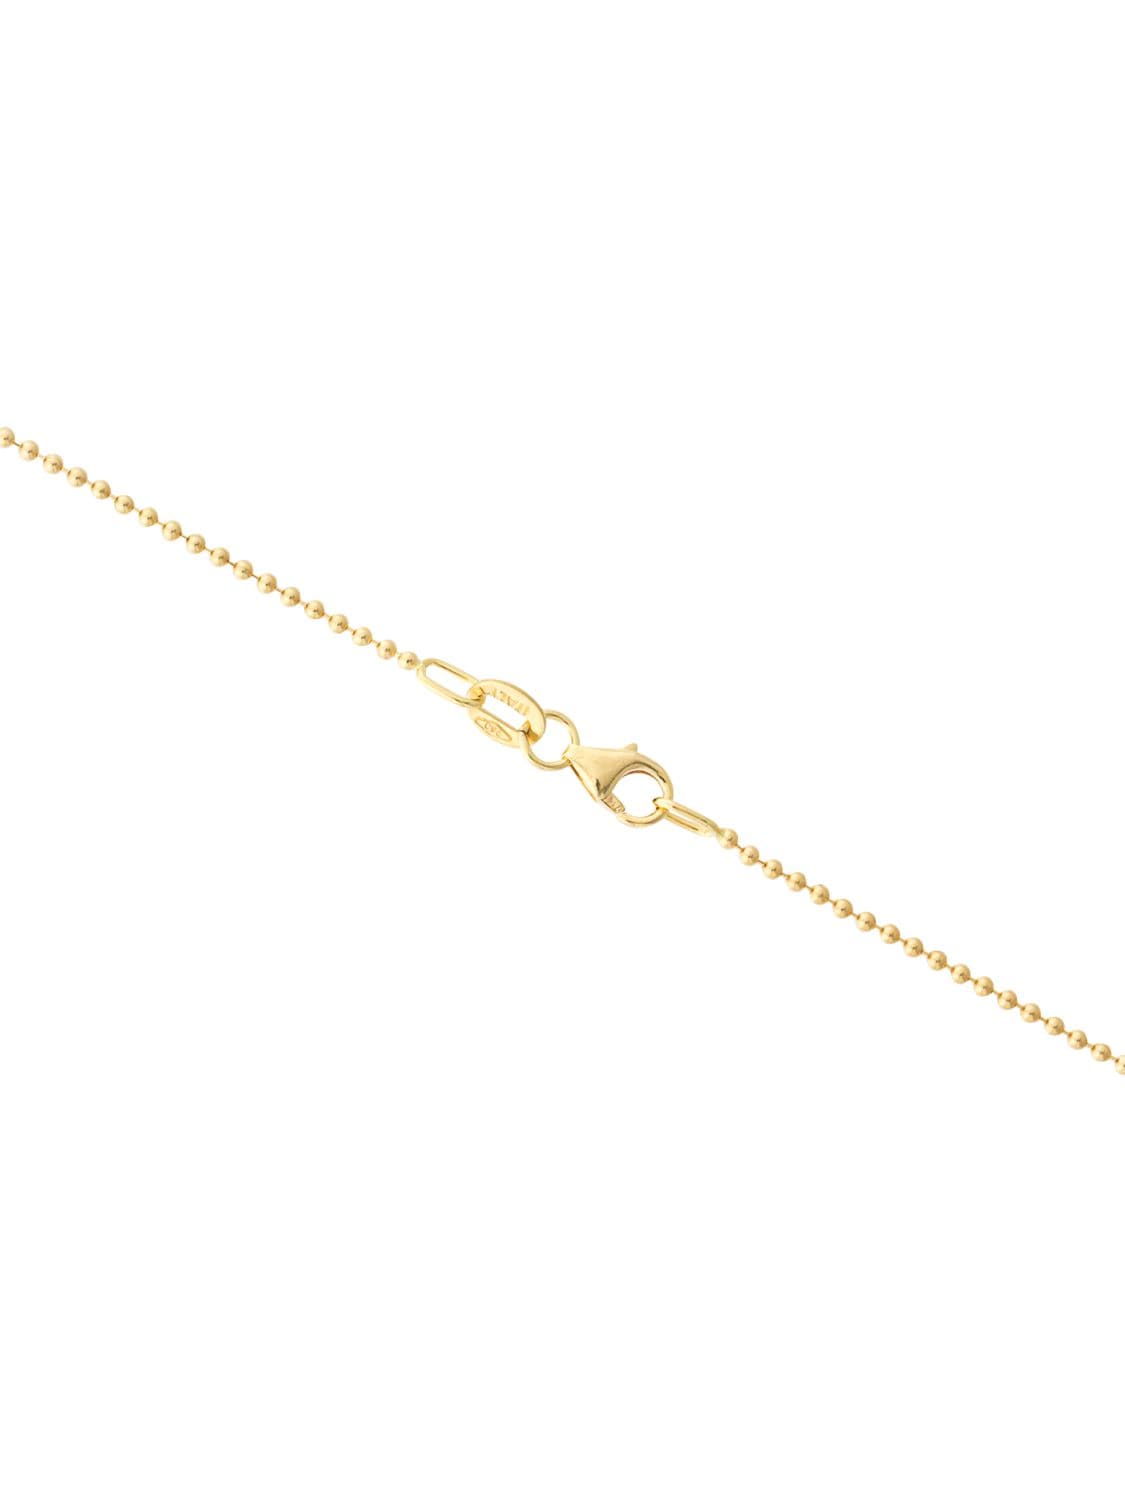 Shop Eéra Lvr Excl. 18kt & Diamond Necklace In Gold,silver